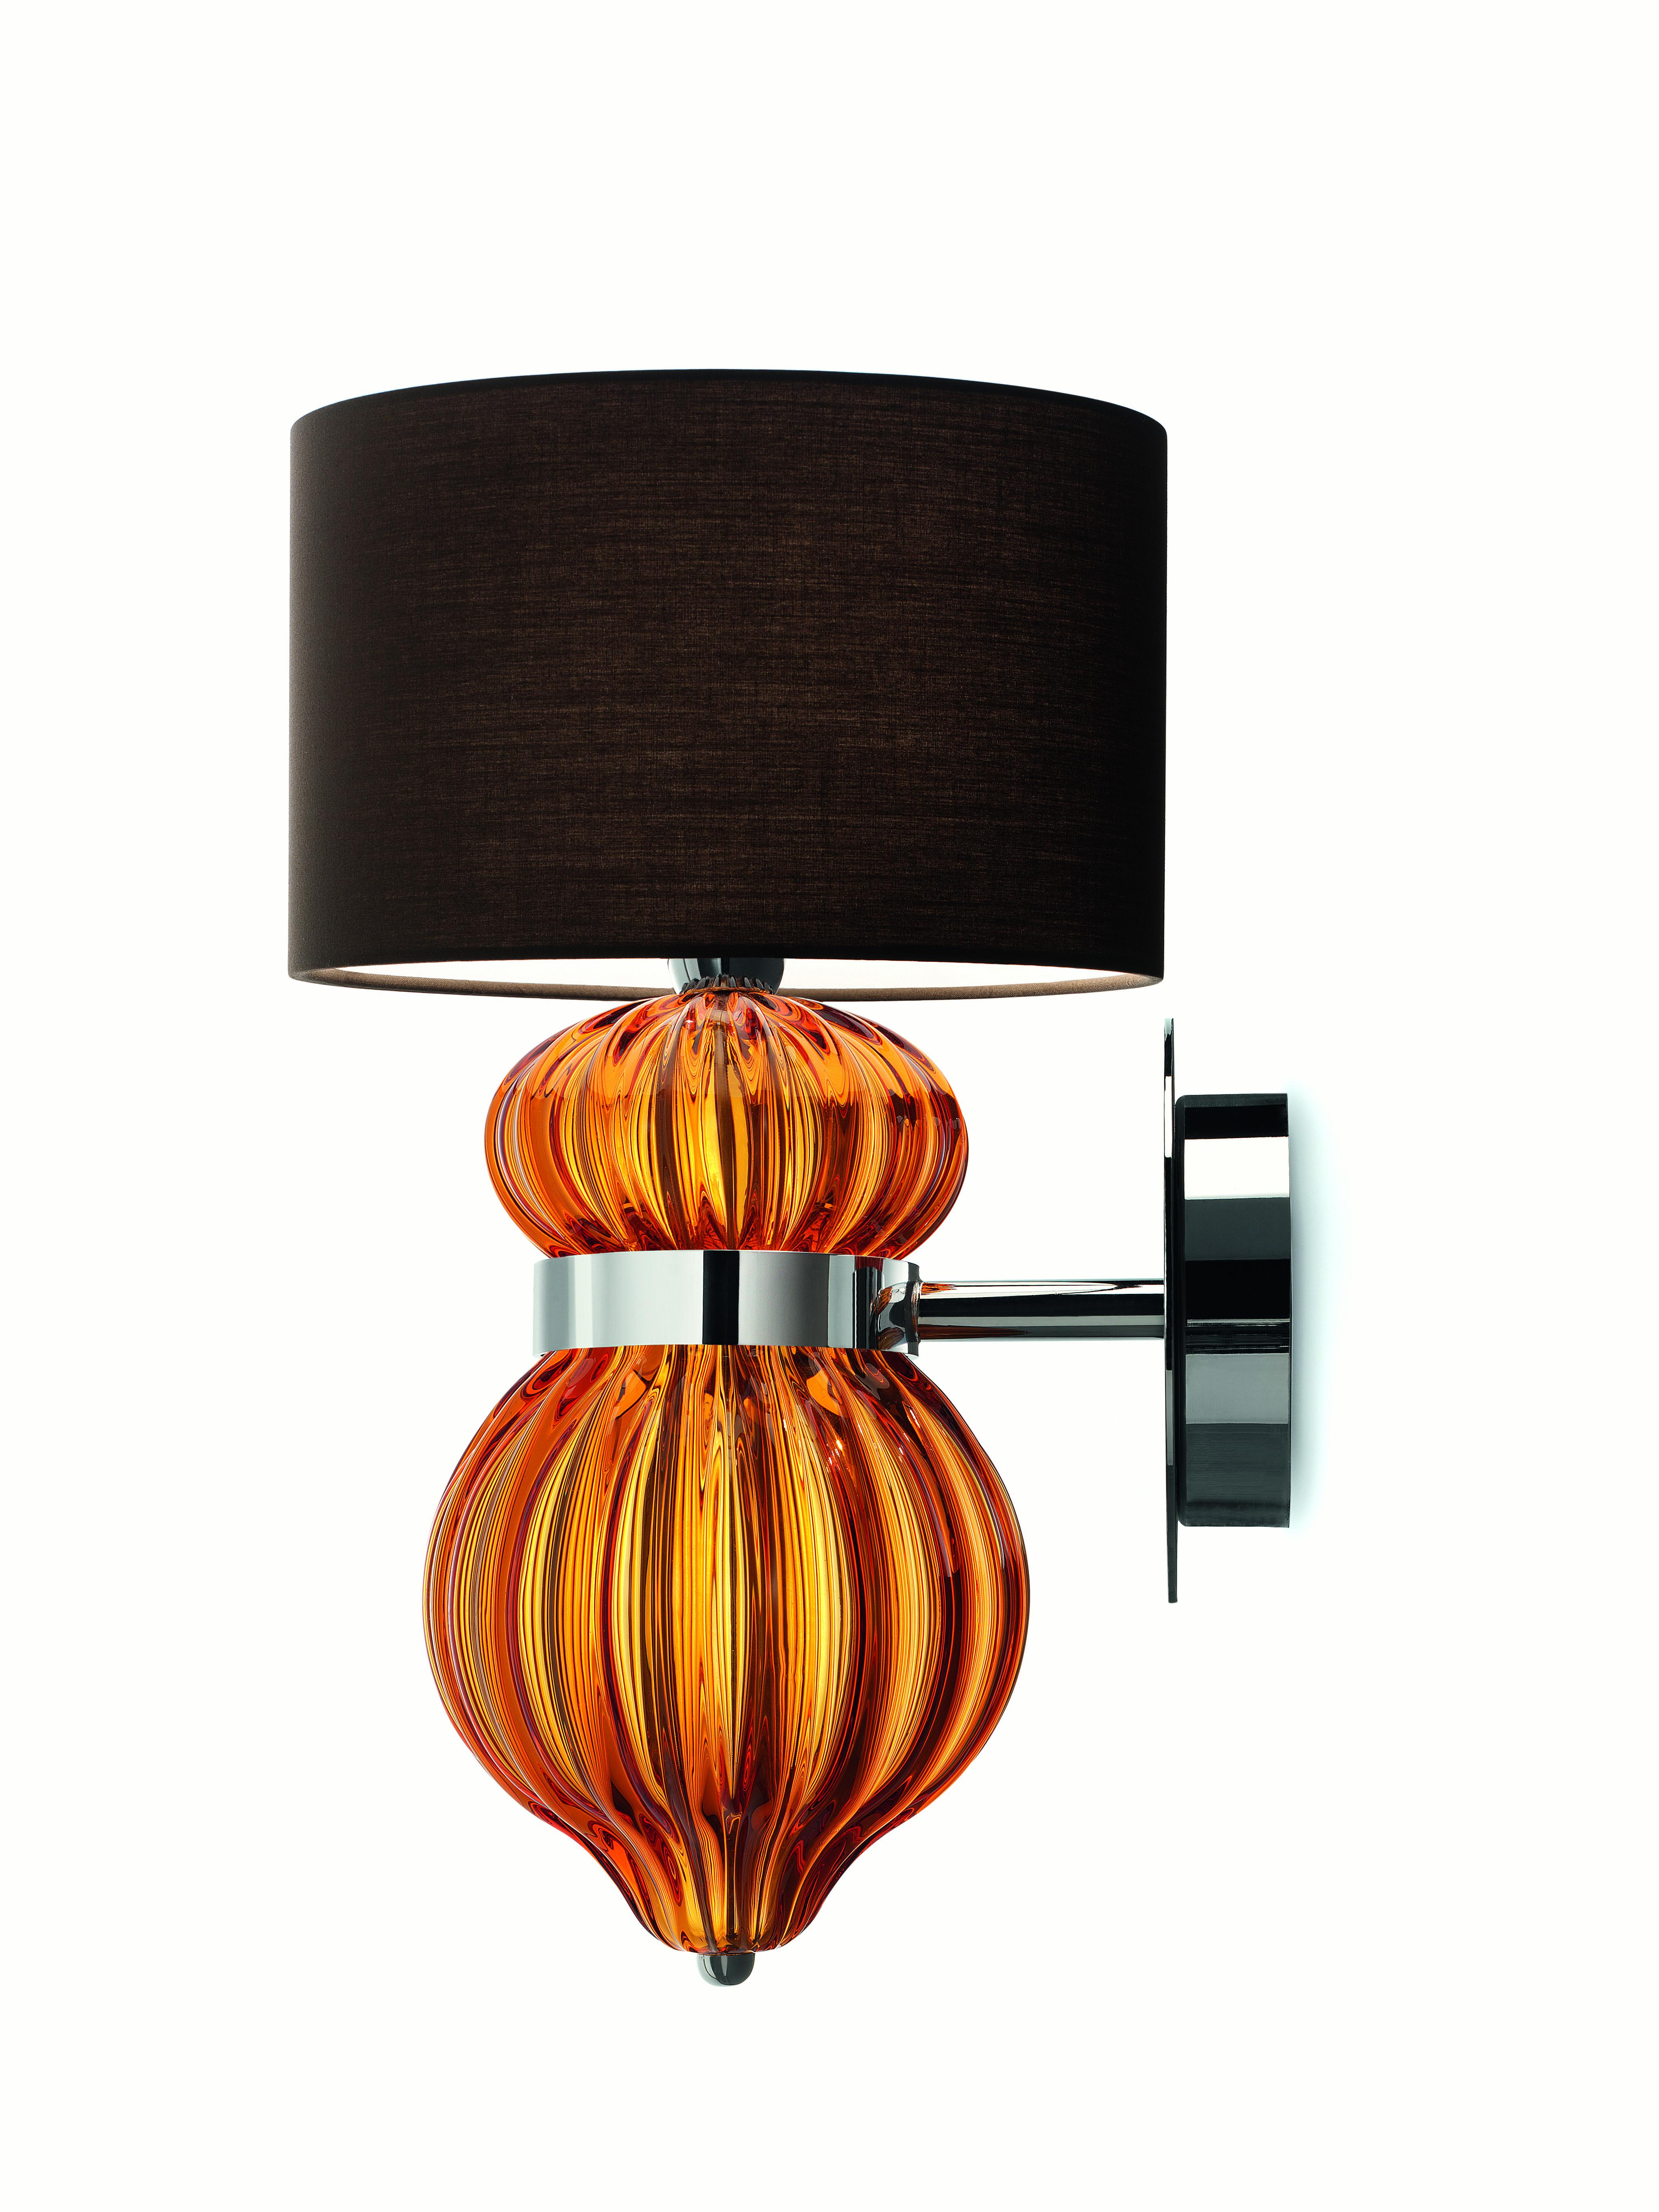 Orange (Caramel_CA) Medina 5683 Wall Sconce in Glass with Brown Shade by, Barovier&Toso 4